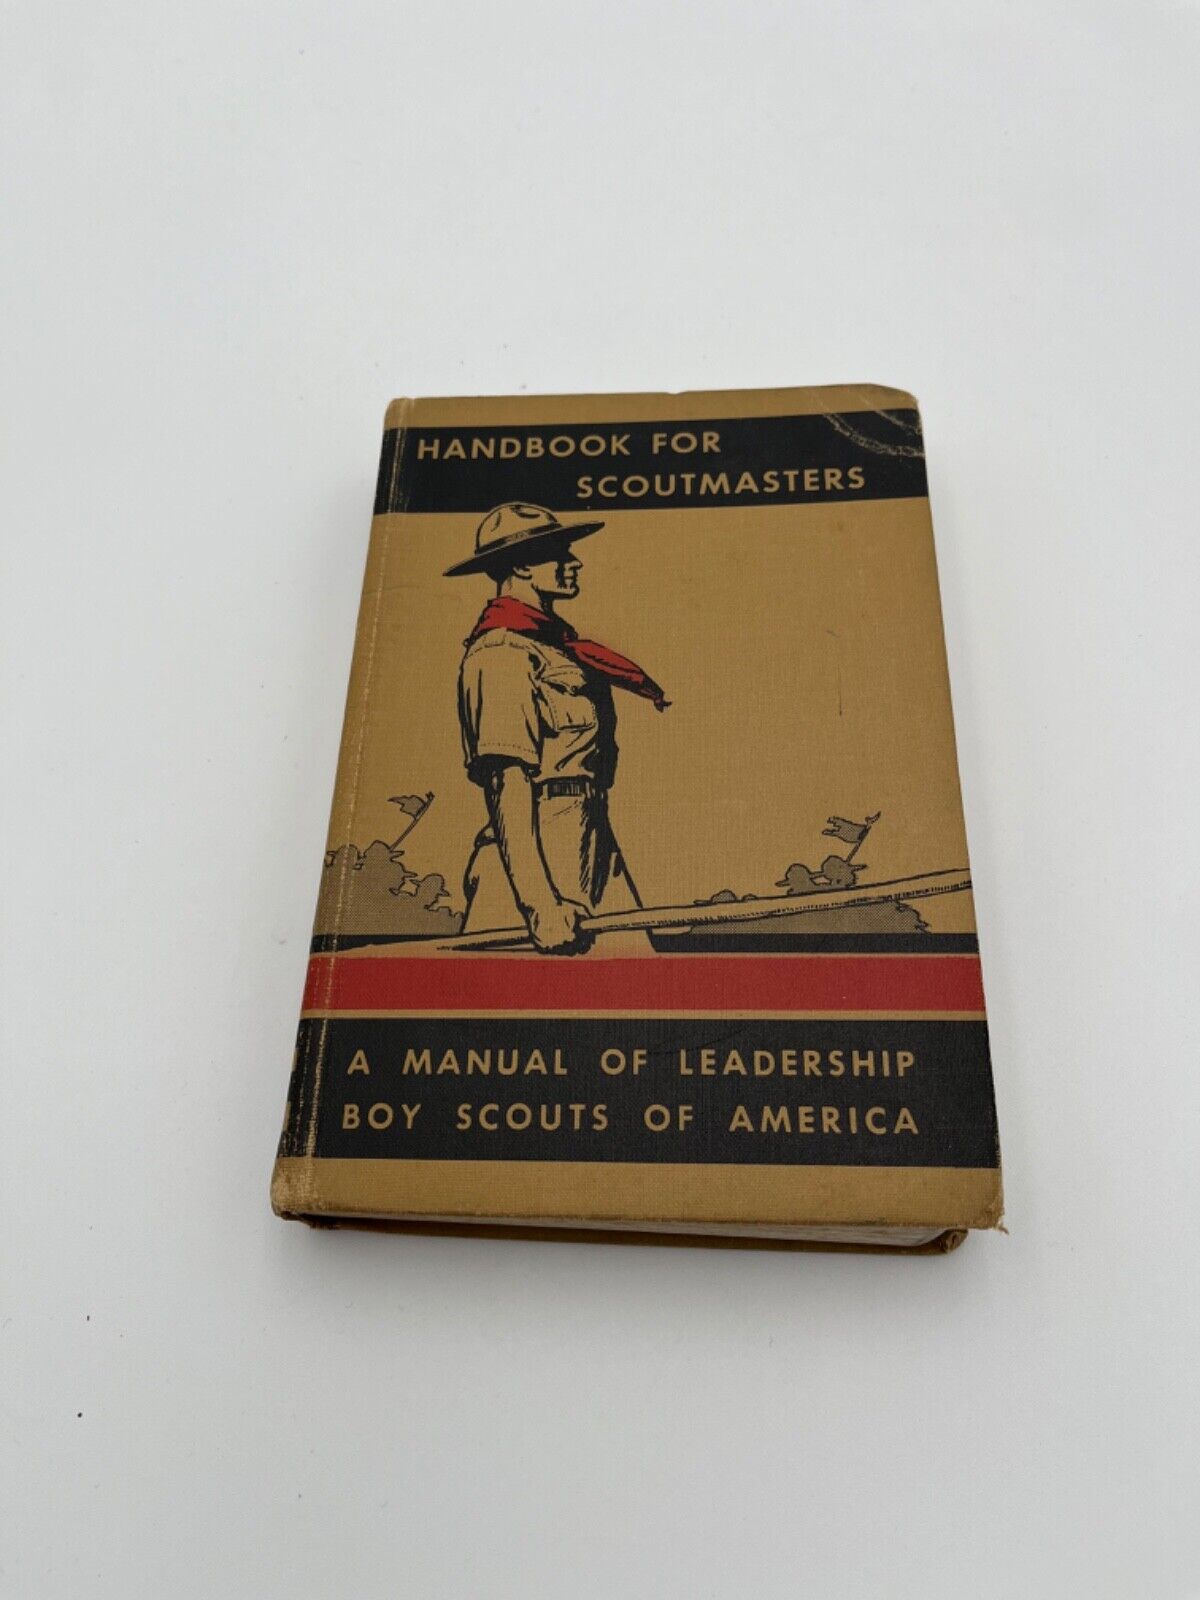 Handbook for Scoutmasters Vol. 2 4th Imprint 1938 Vintage Hardcover Boyscouts